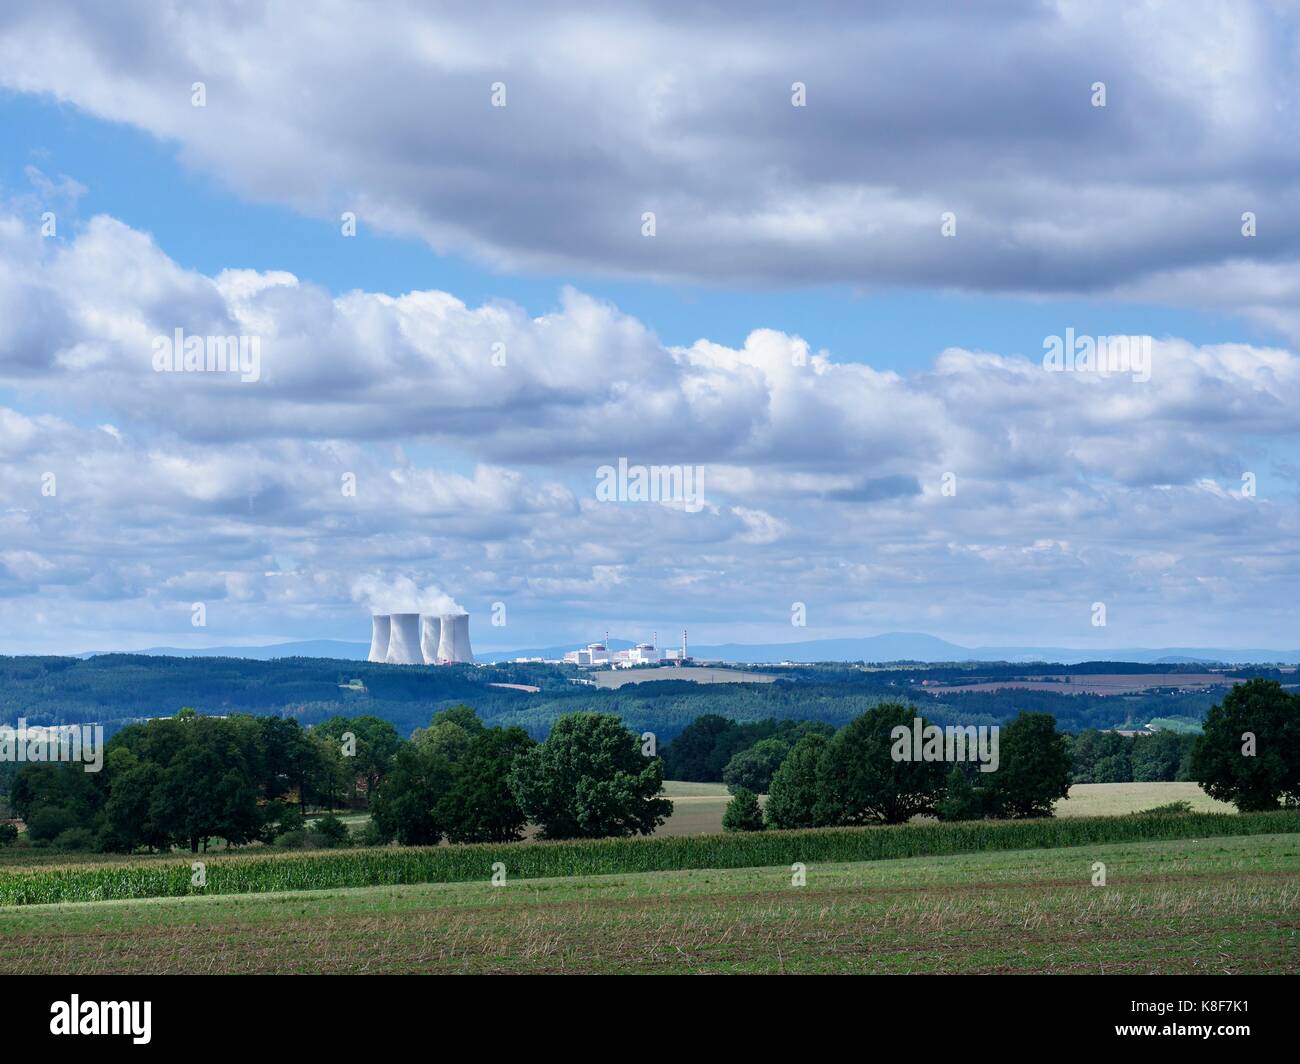 Temelin, power plant, cooling towers, clouds, trees Stock Photo